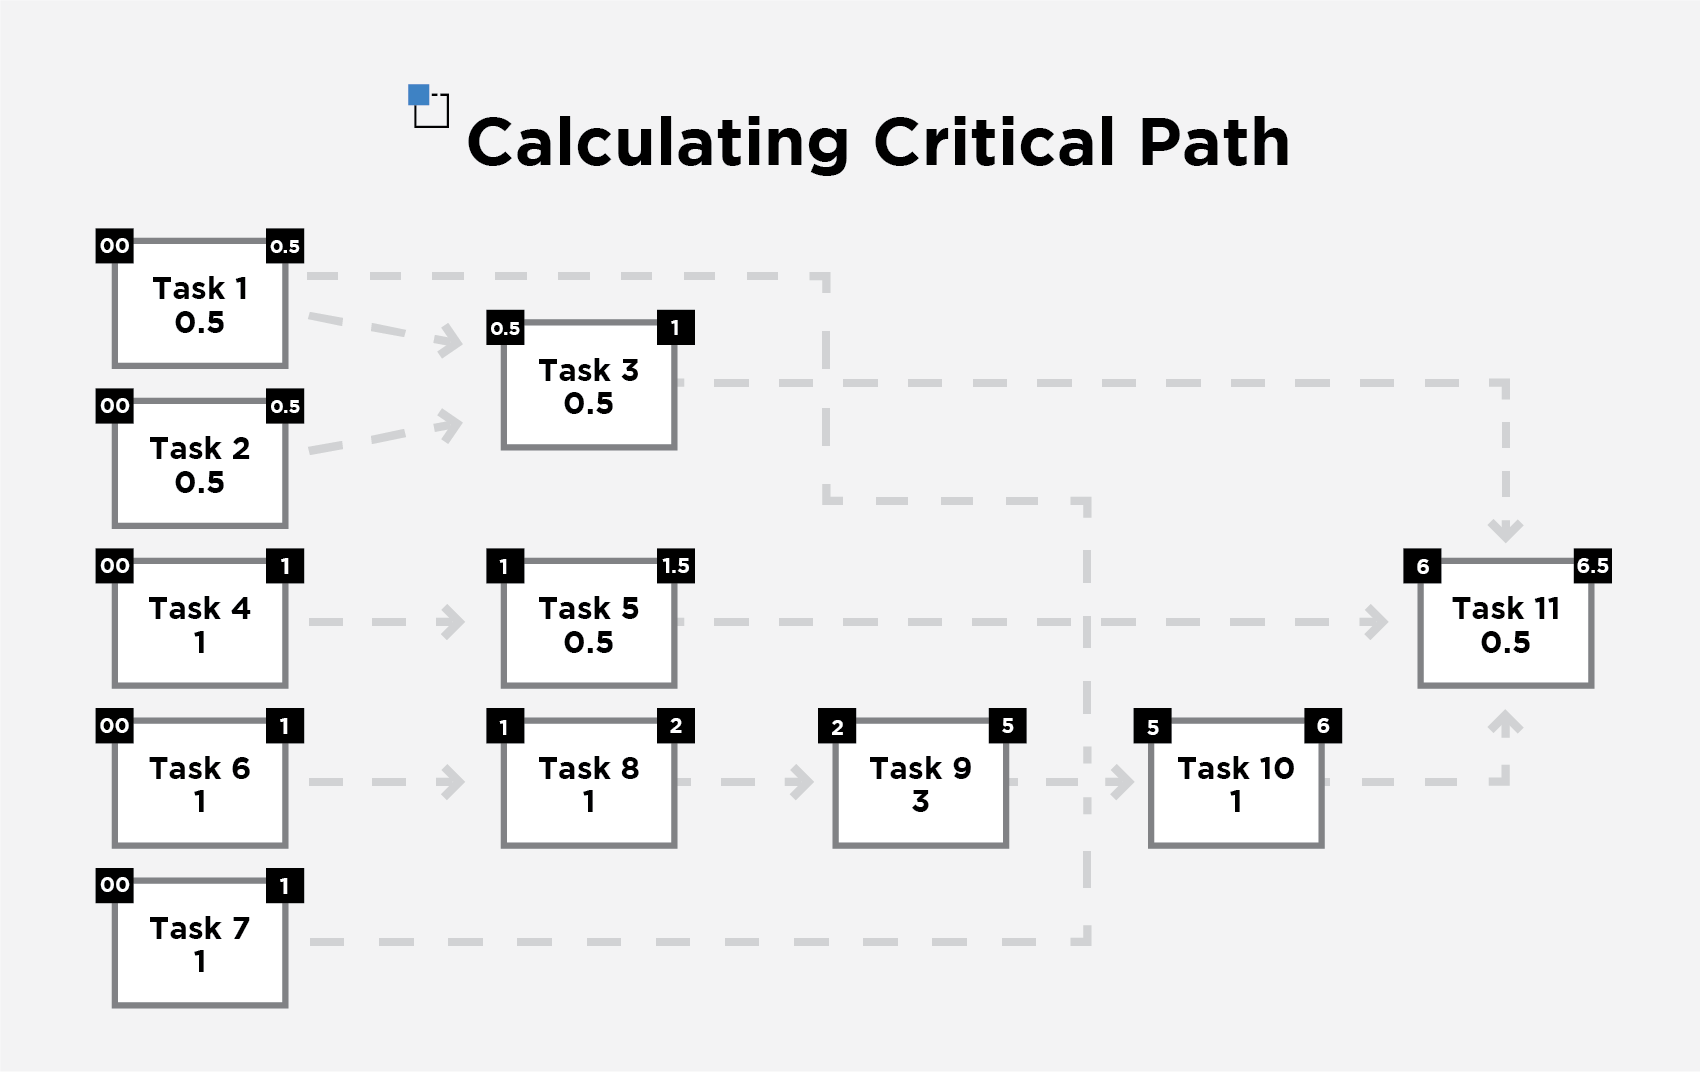 Flow chart mapping out critical path